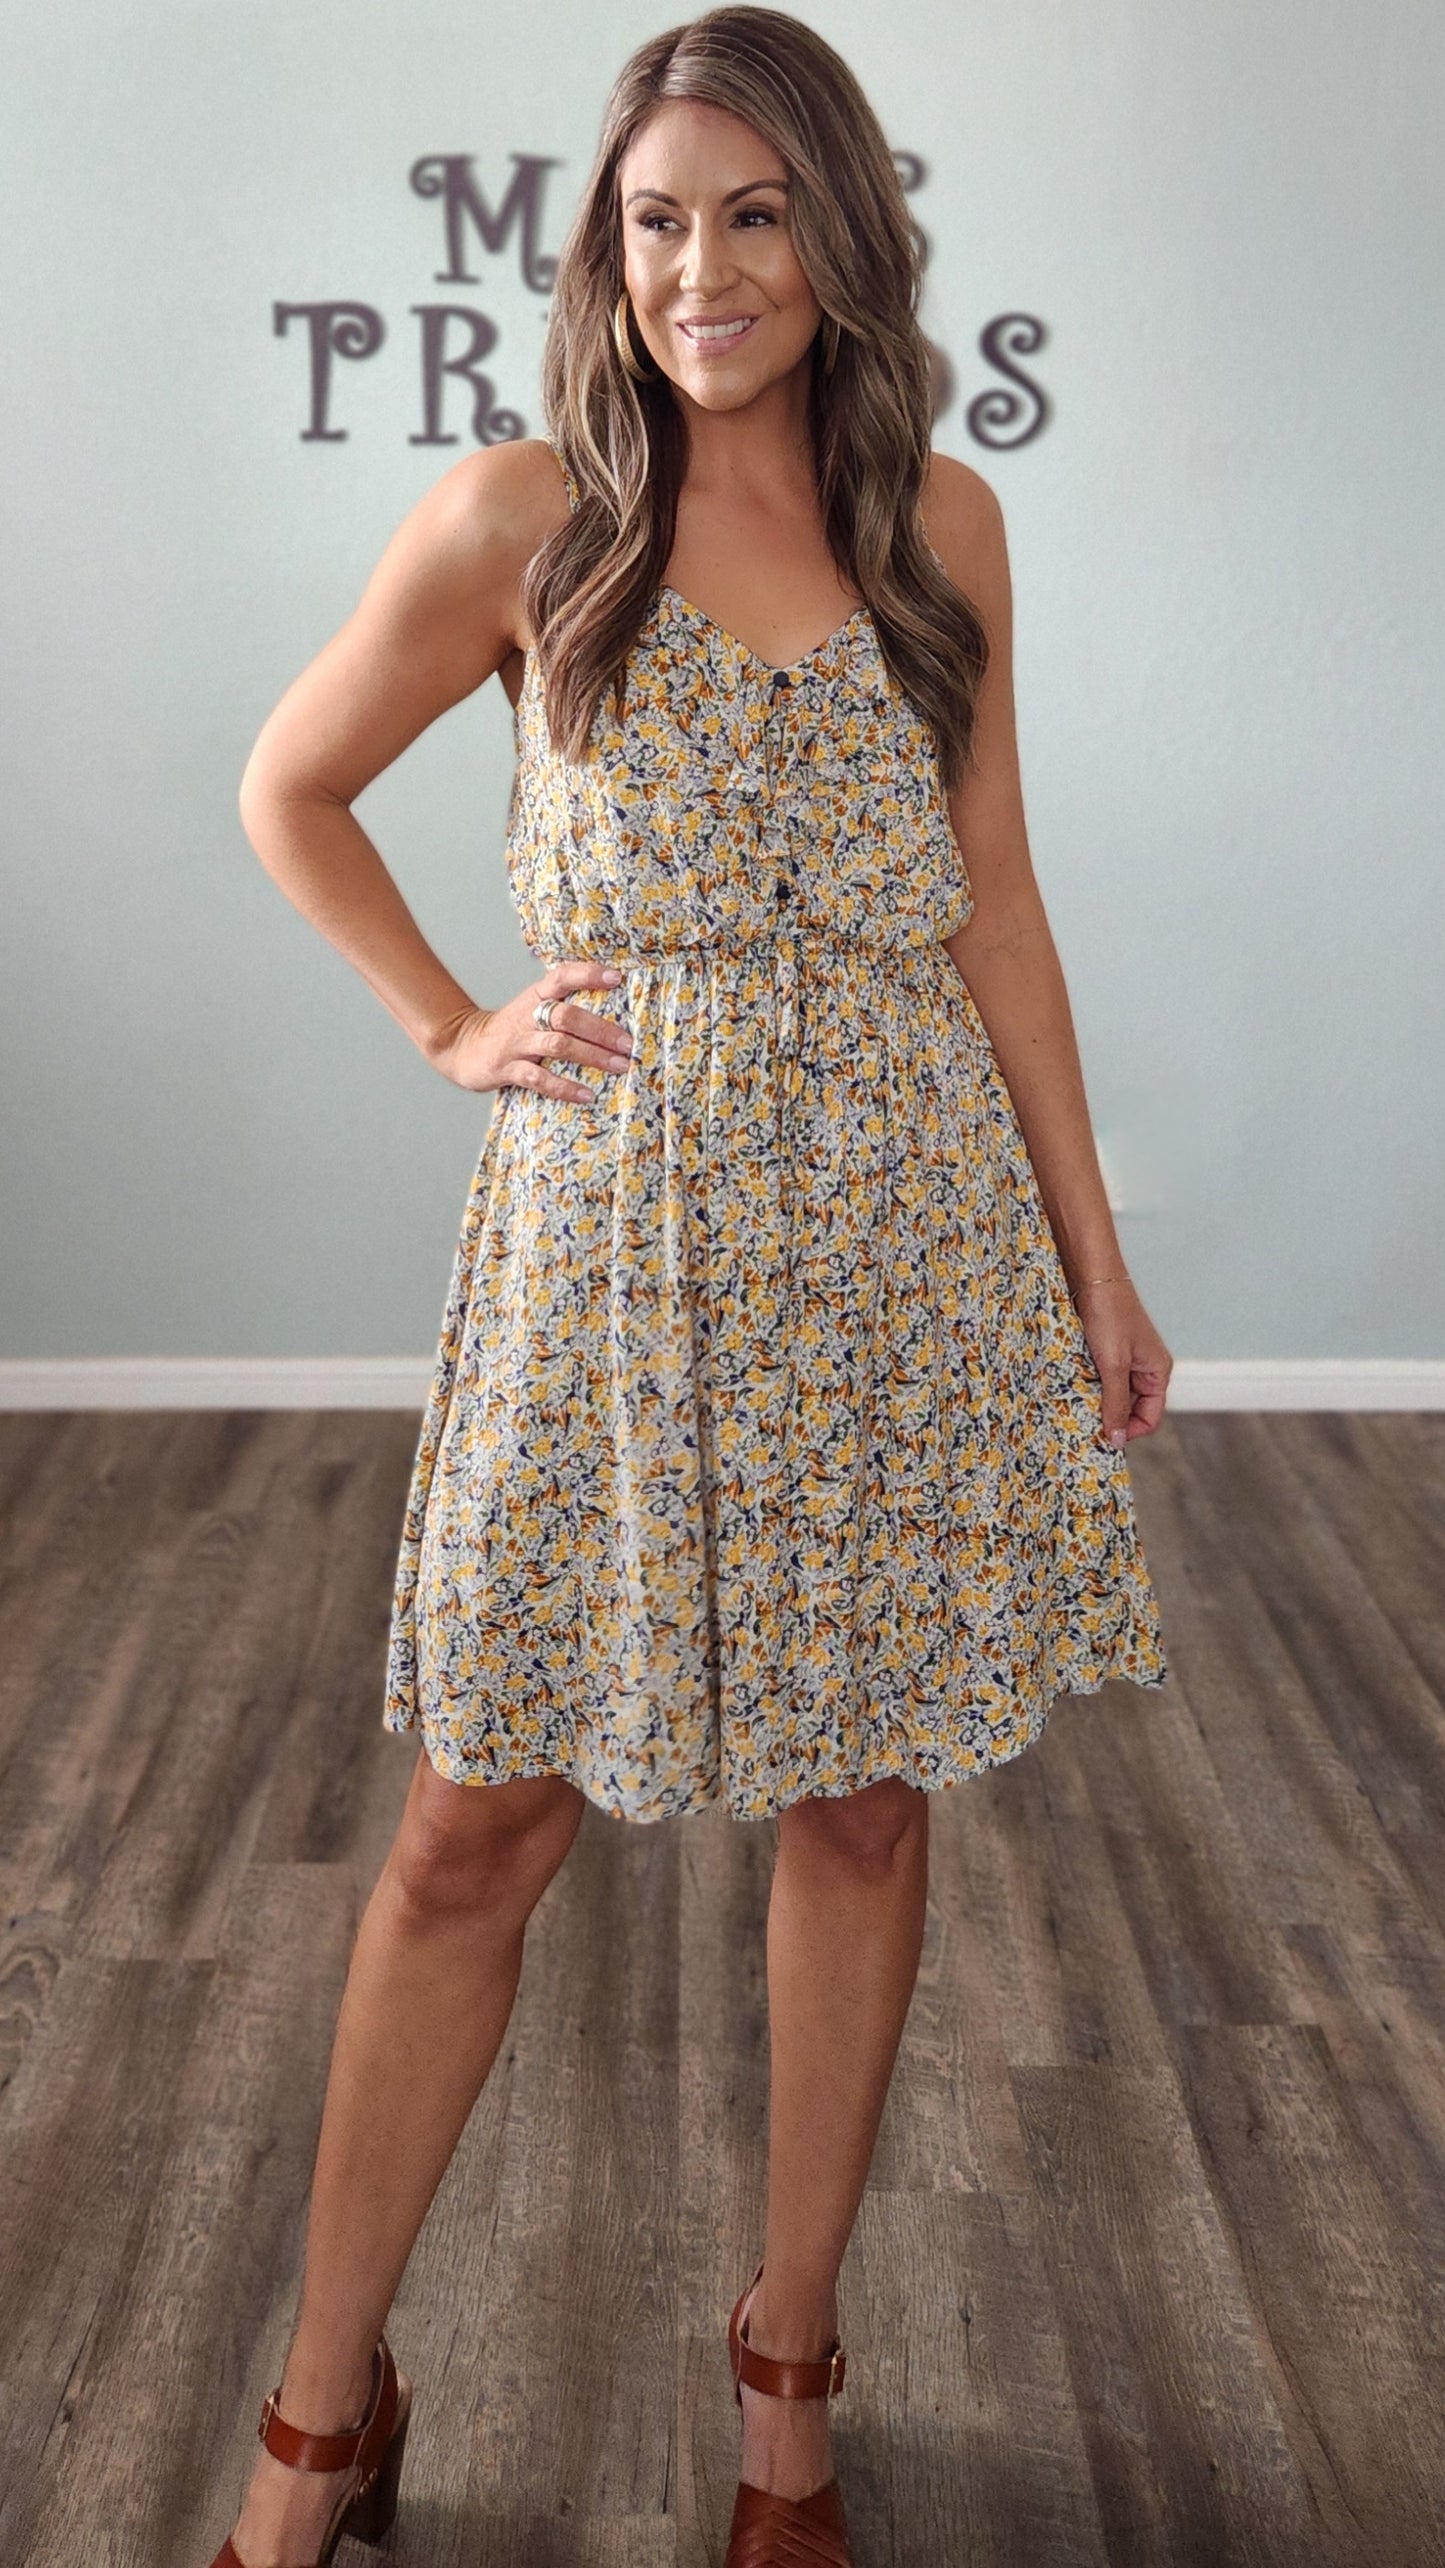 Fun and Fabulous Dress-Floral/ Multi-color